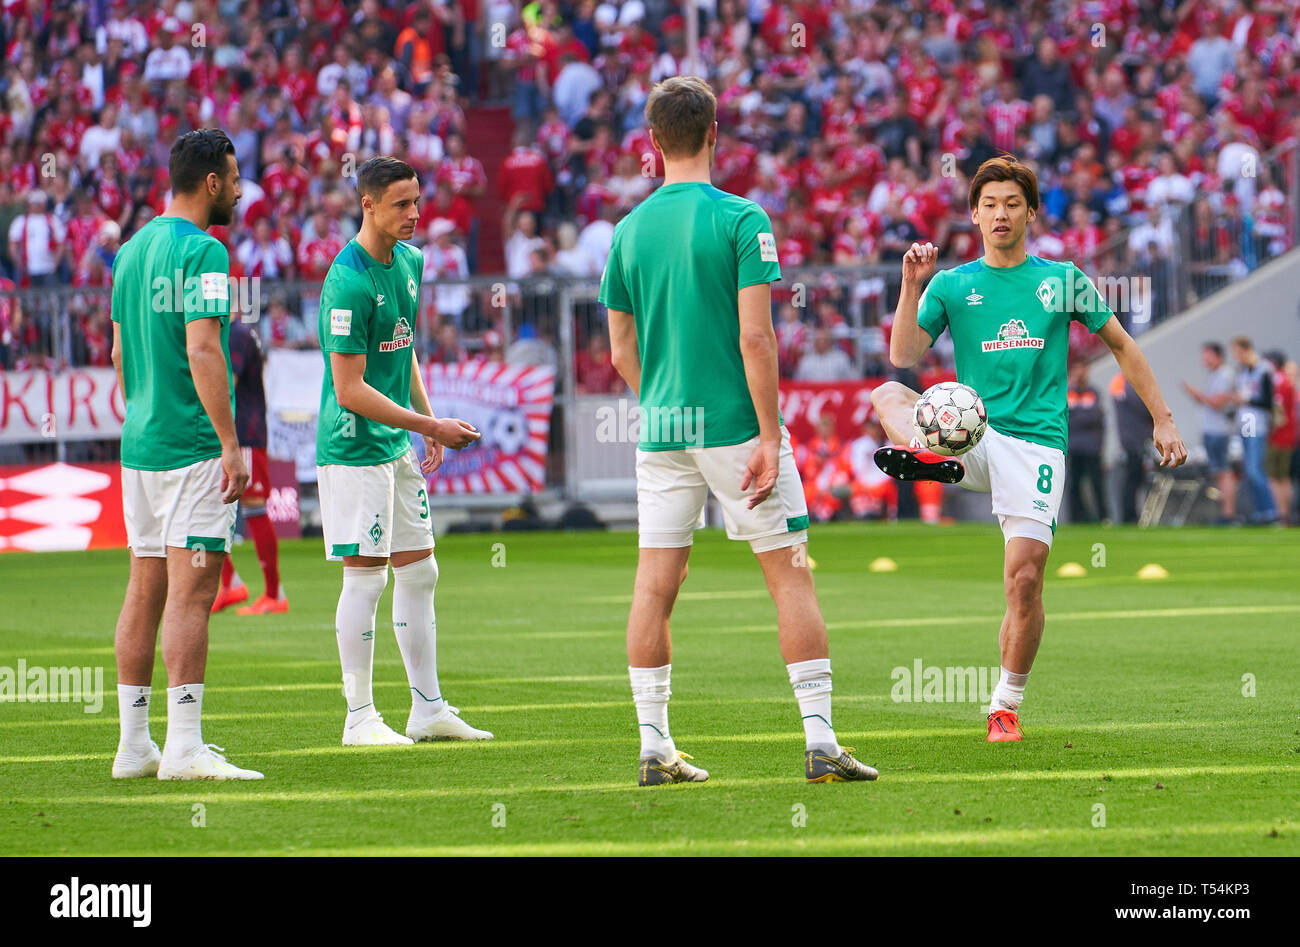 Munich, Germany. 20th Apr, 2019. Claudio PIZARRO, BRE 4 Yuya OSAKO, BRE 8 Sebastian LANGKAMP, BRE 15 Marco FRIEDL, BRE 32 Gymnastics, stretching, warming up, warm-up, preparation for the game,   FC BAYERN MUNICH - SV WERDER BREMEN 1-0  - DFL REGULATIONS PROHIBIT ANY USE OF PHOTOGRAPHS as IMAGE SEQUENCES and/or QUASI-VIDEO -  1.German Soccer League , Munich, April 20, 2019  Season 2018/2019, matchday 30, FCB, München, © Peter Schatz / Alamy Live News Credit: Peter Schatz/Alamy Live News Stock Photo